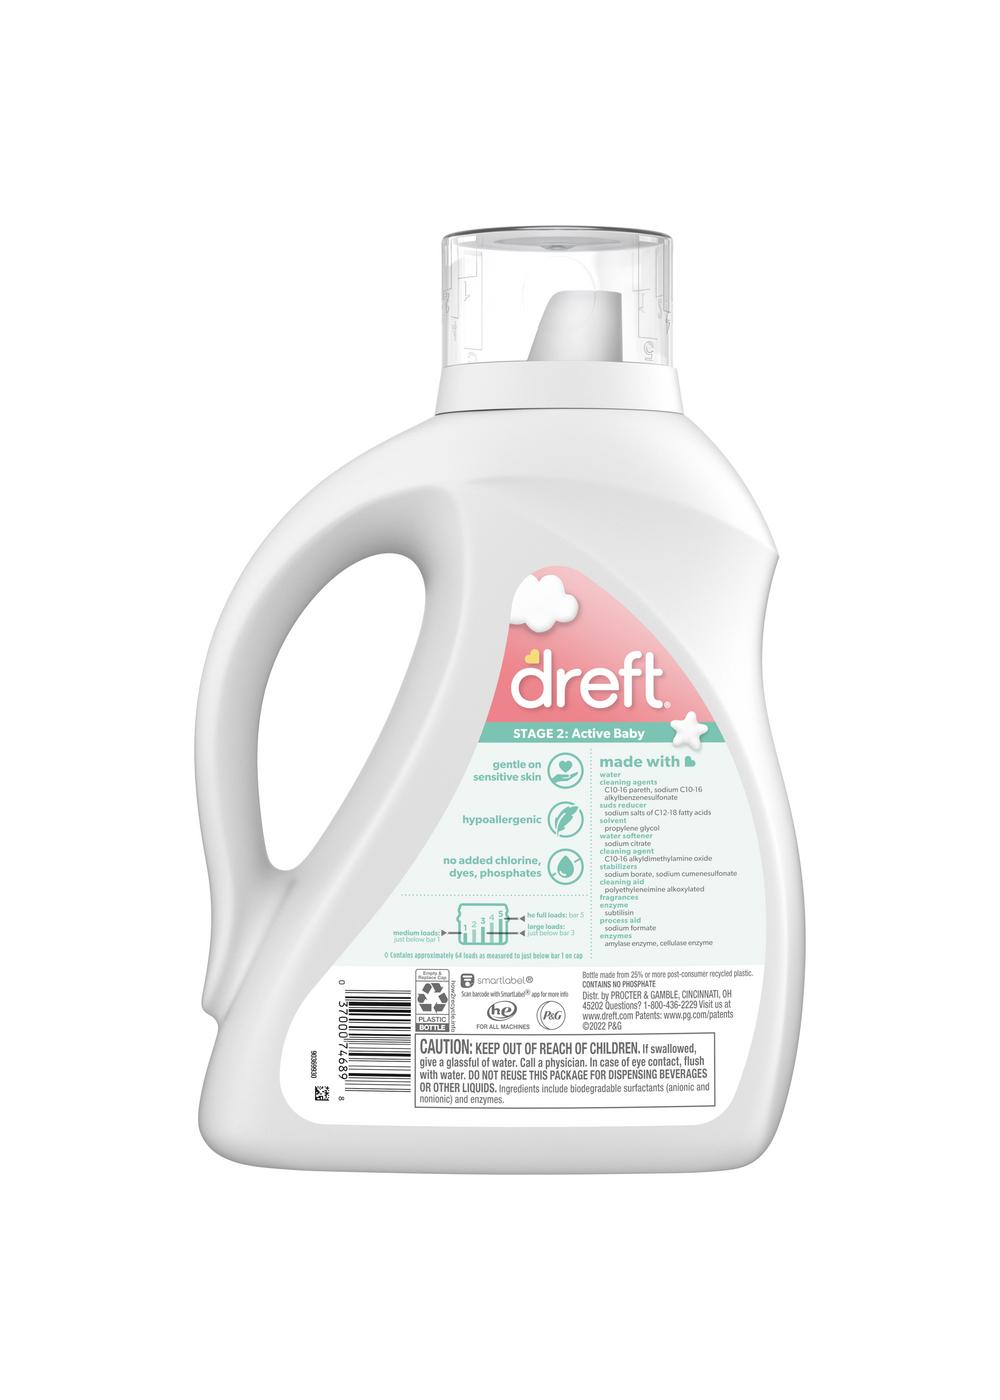 Dreft Stage 2: Active Baby HE Liquid Laundry Detergent, 64 Loads; image 3 of 11